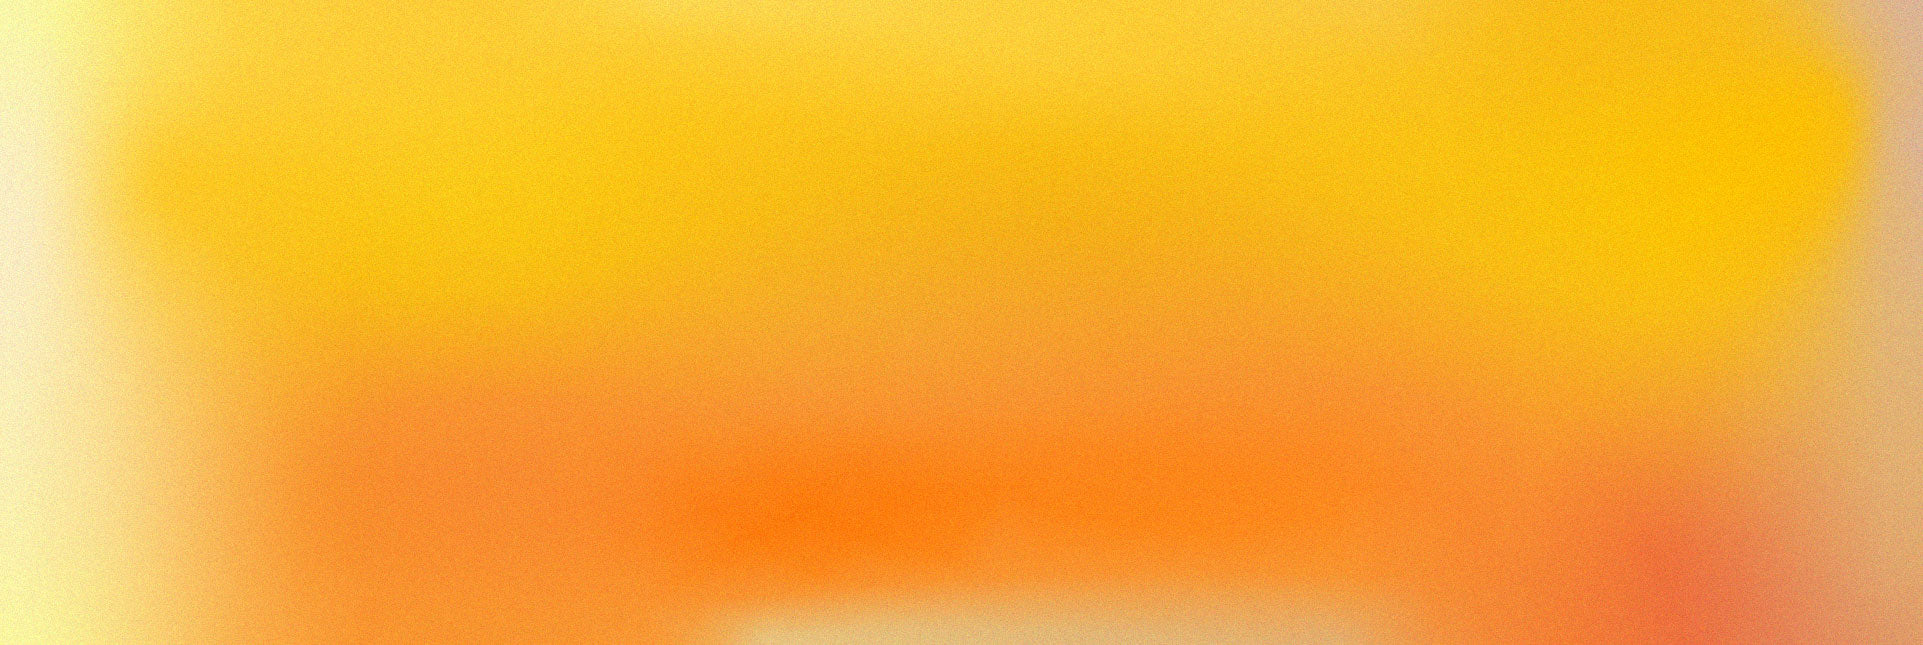 Orange and yellow colors blending together like spraypaint